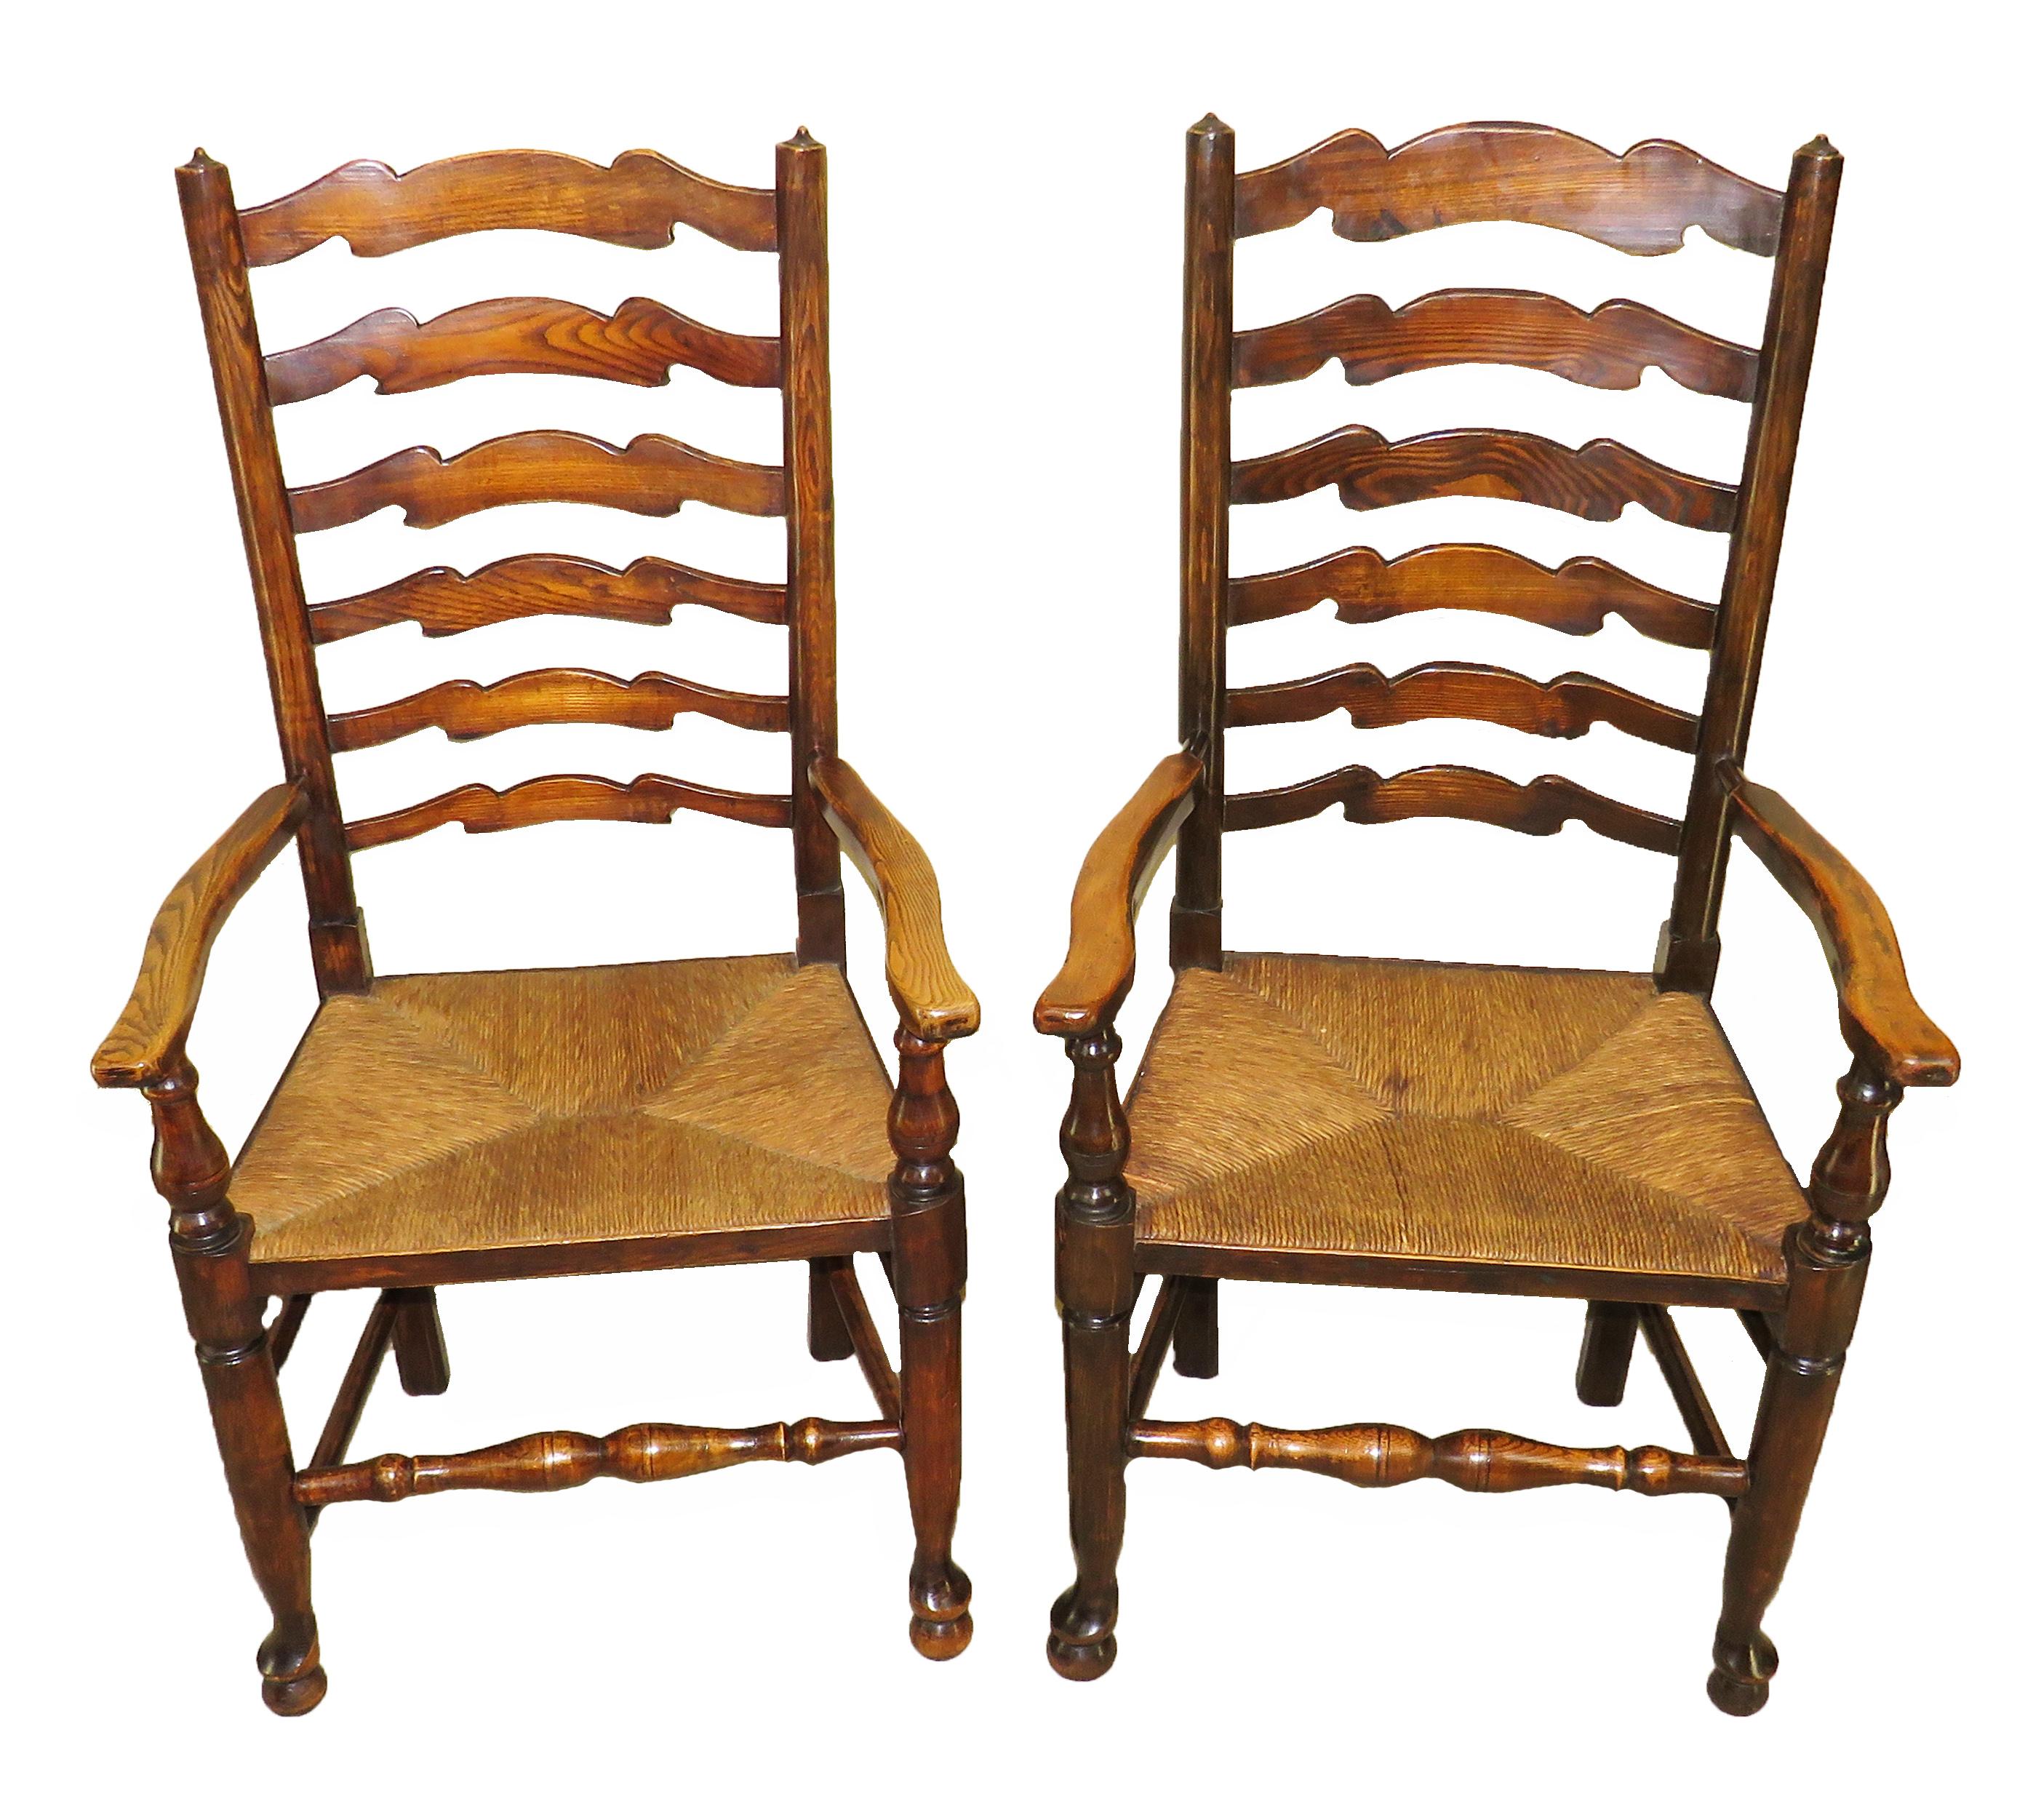 A delightful set of 10 matched English late 19th century ash
and elm ladder back country dining chairs consisting of
8 single chairs and 2 armchairs having elegant wavy
ladderbacks over rushed seats raised on turned legs
and stretchers

(These